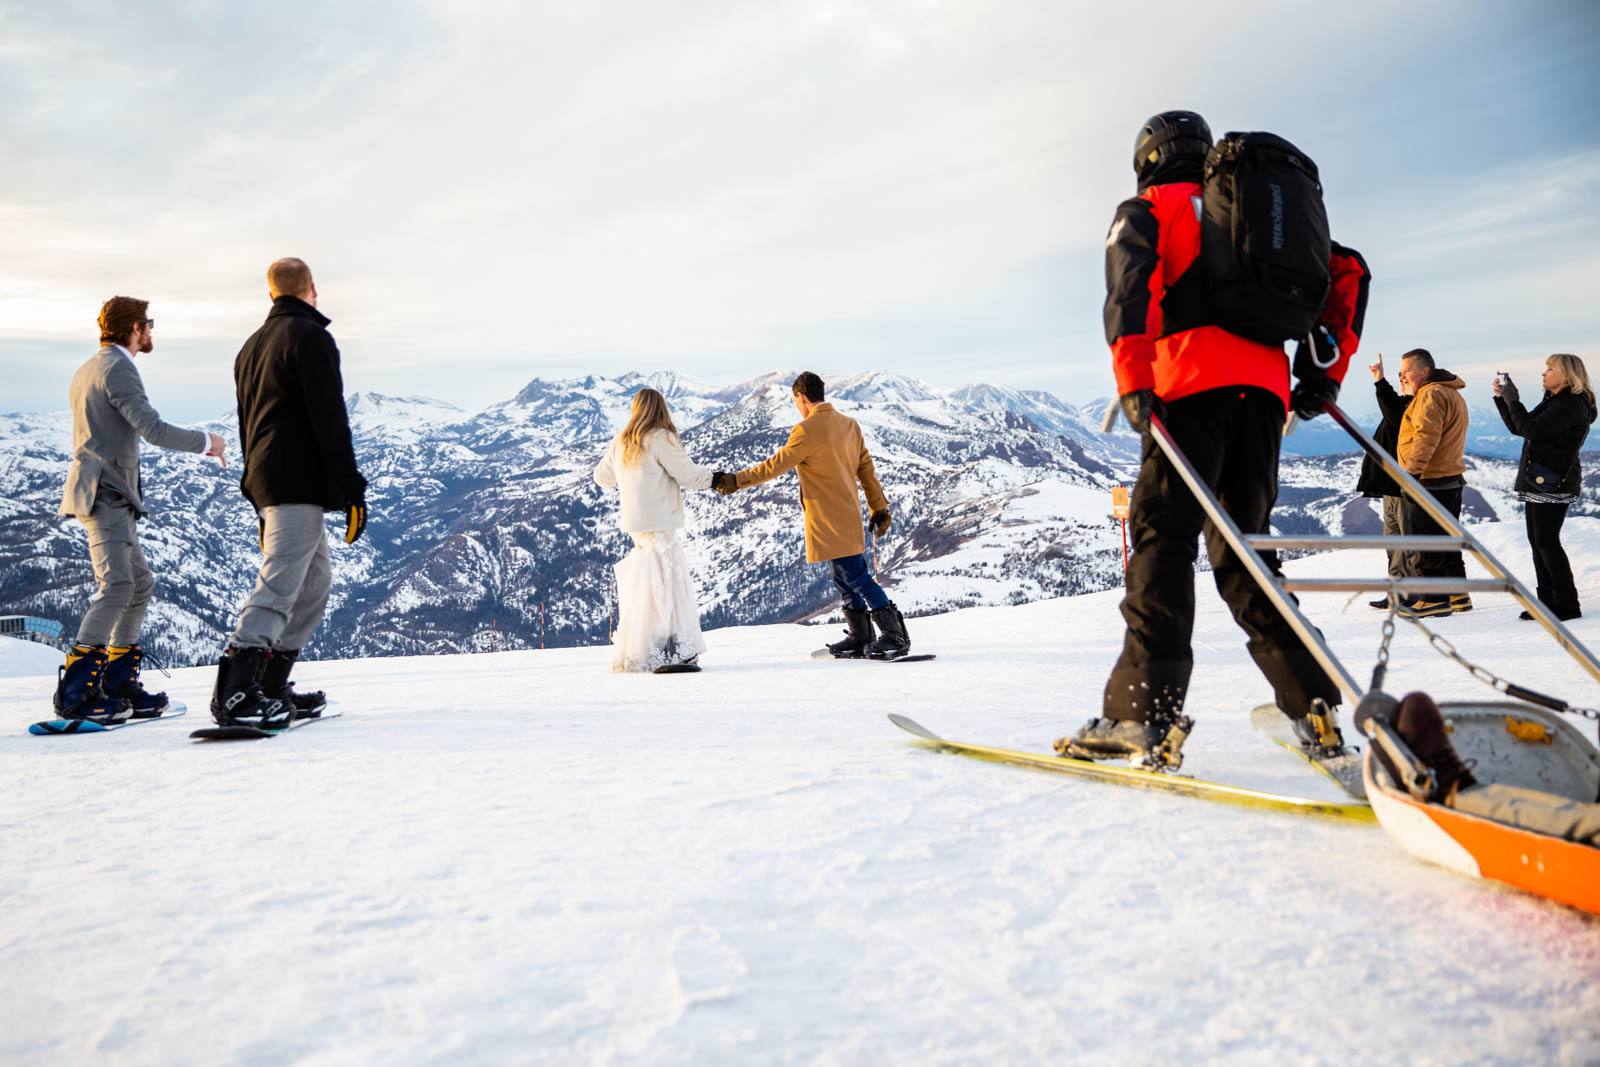 Bride and groom snowboard down a mountain at sunset